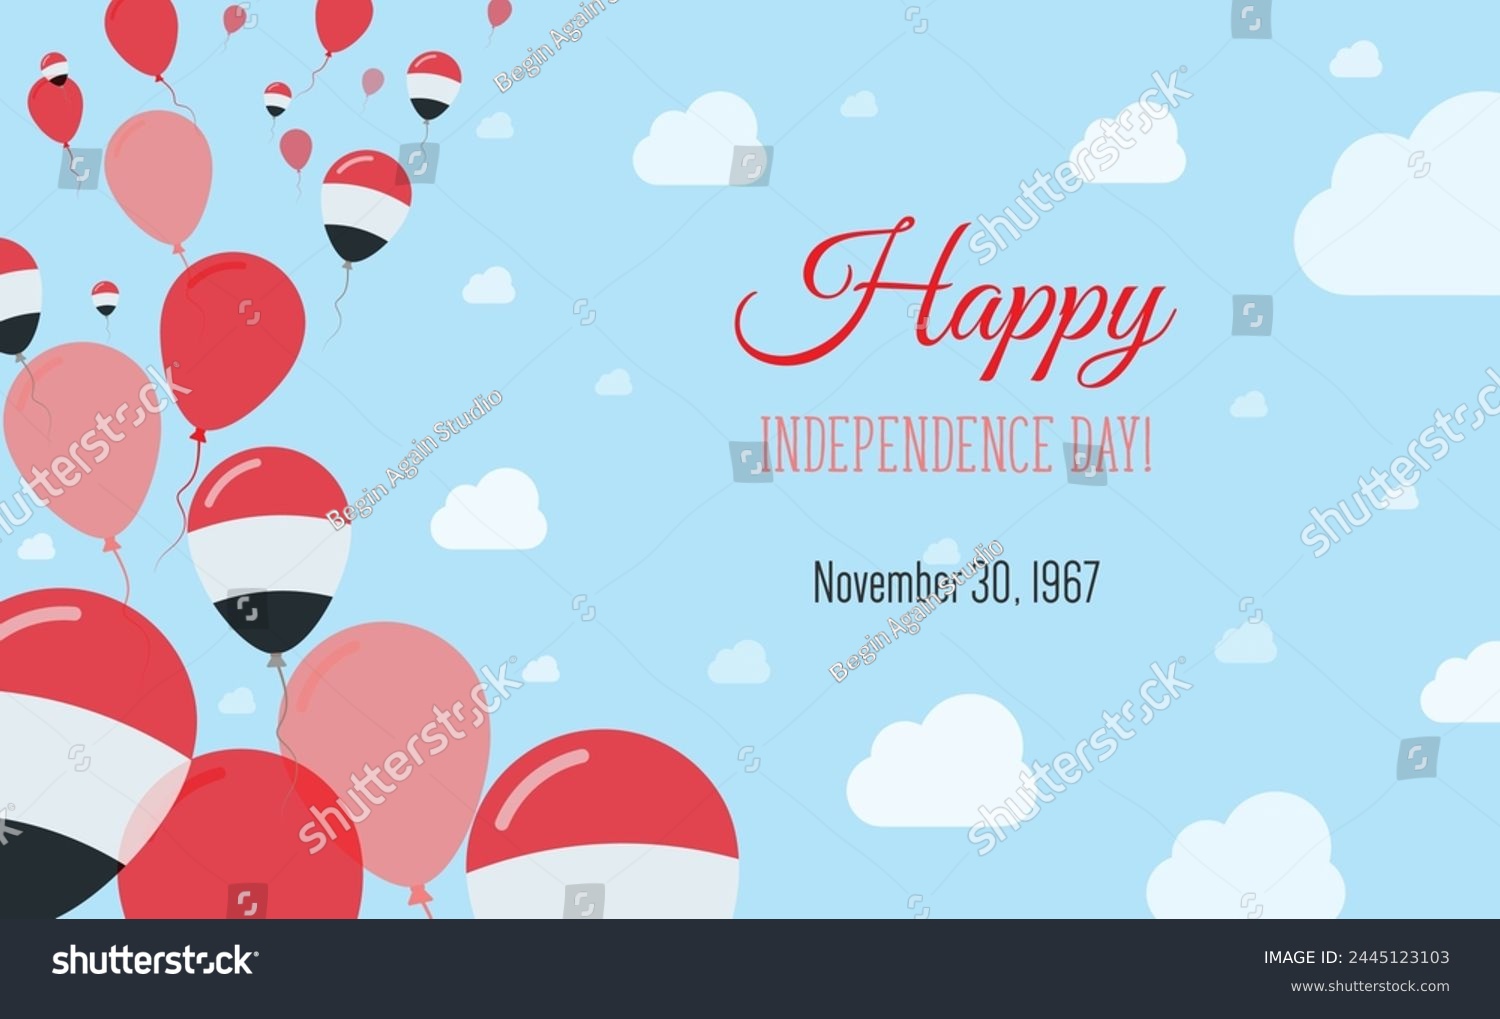 SVG of Yemen Independence Day Sparkling Patriotic Poster. Row of Balloons in Colors of the Yemeni Flag. Greeting Card with National Flags, Blue Skyes and Clouds. svg